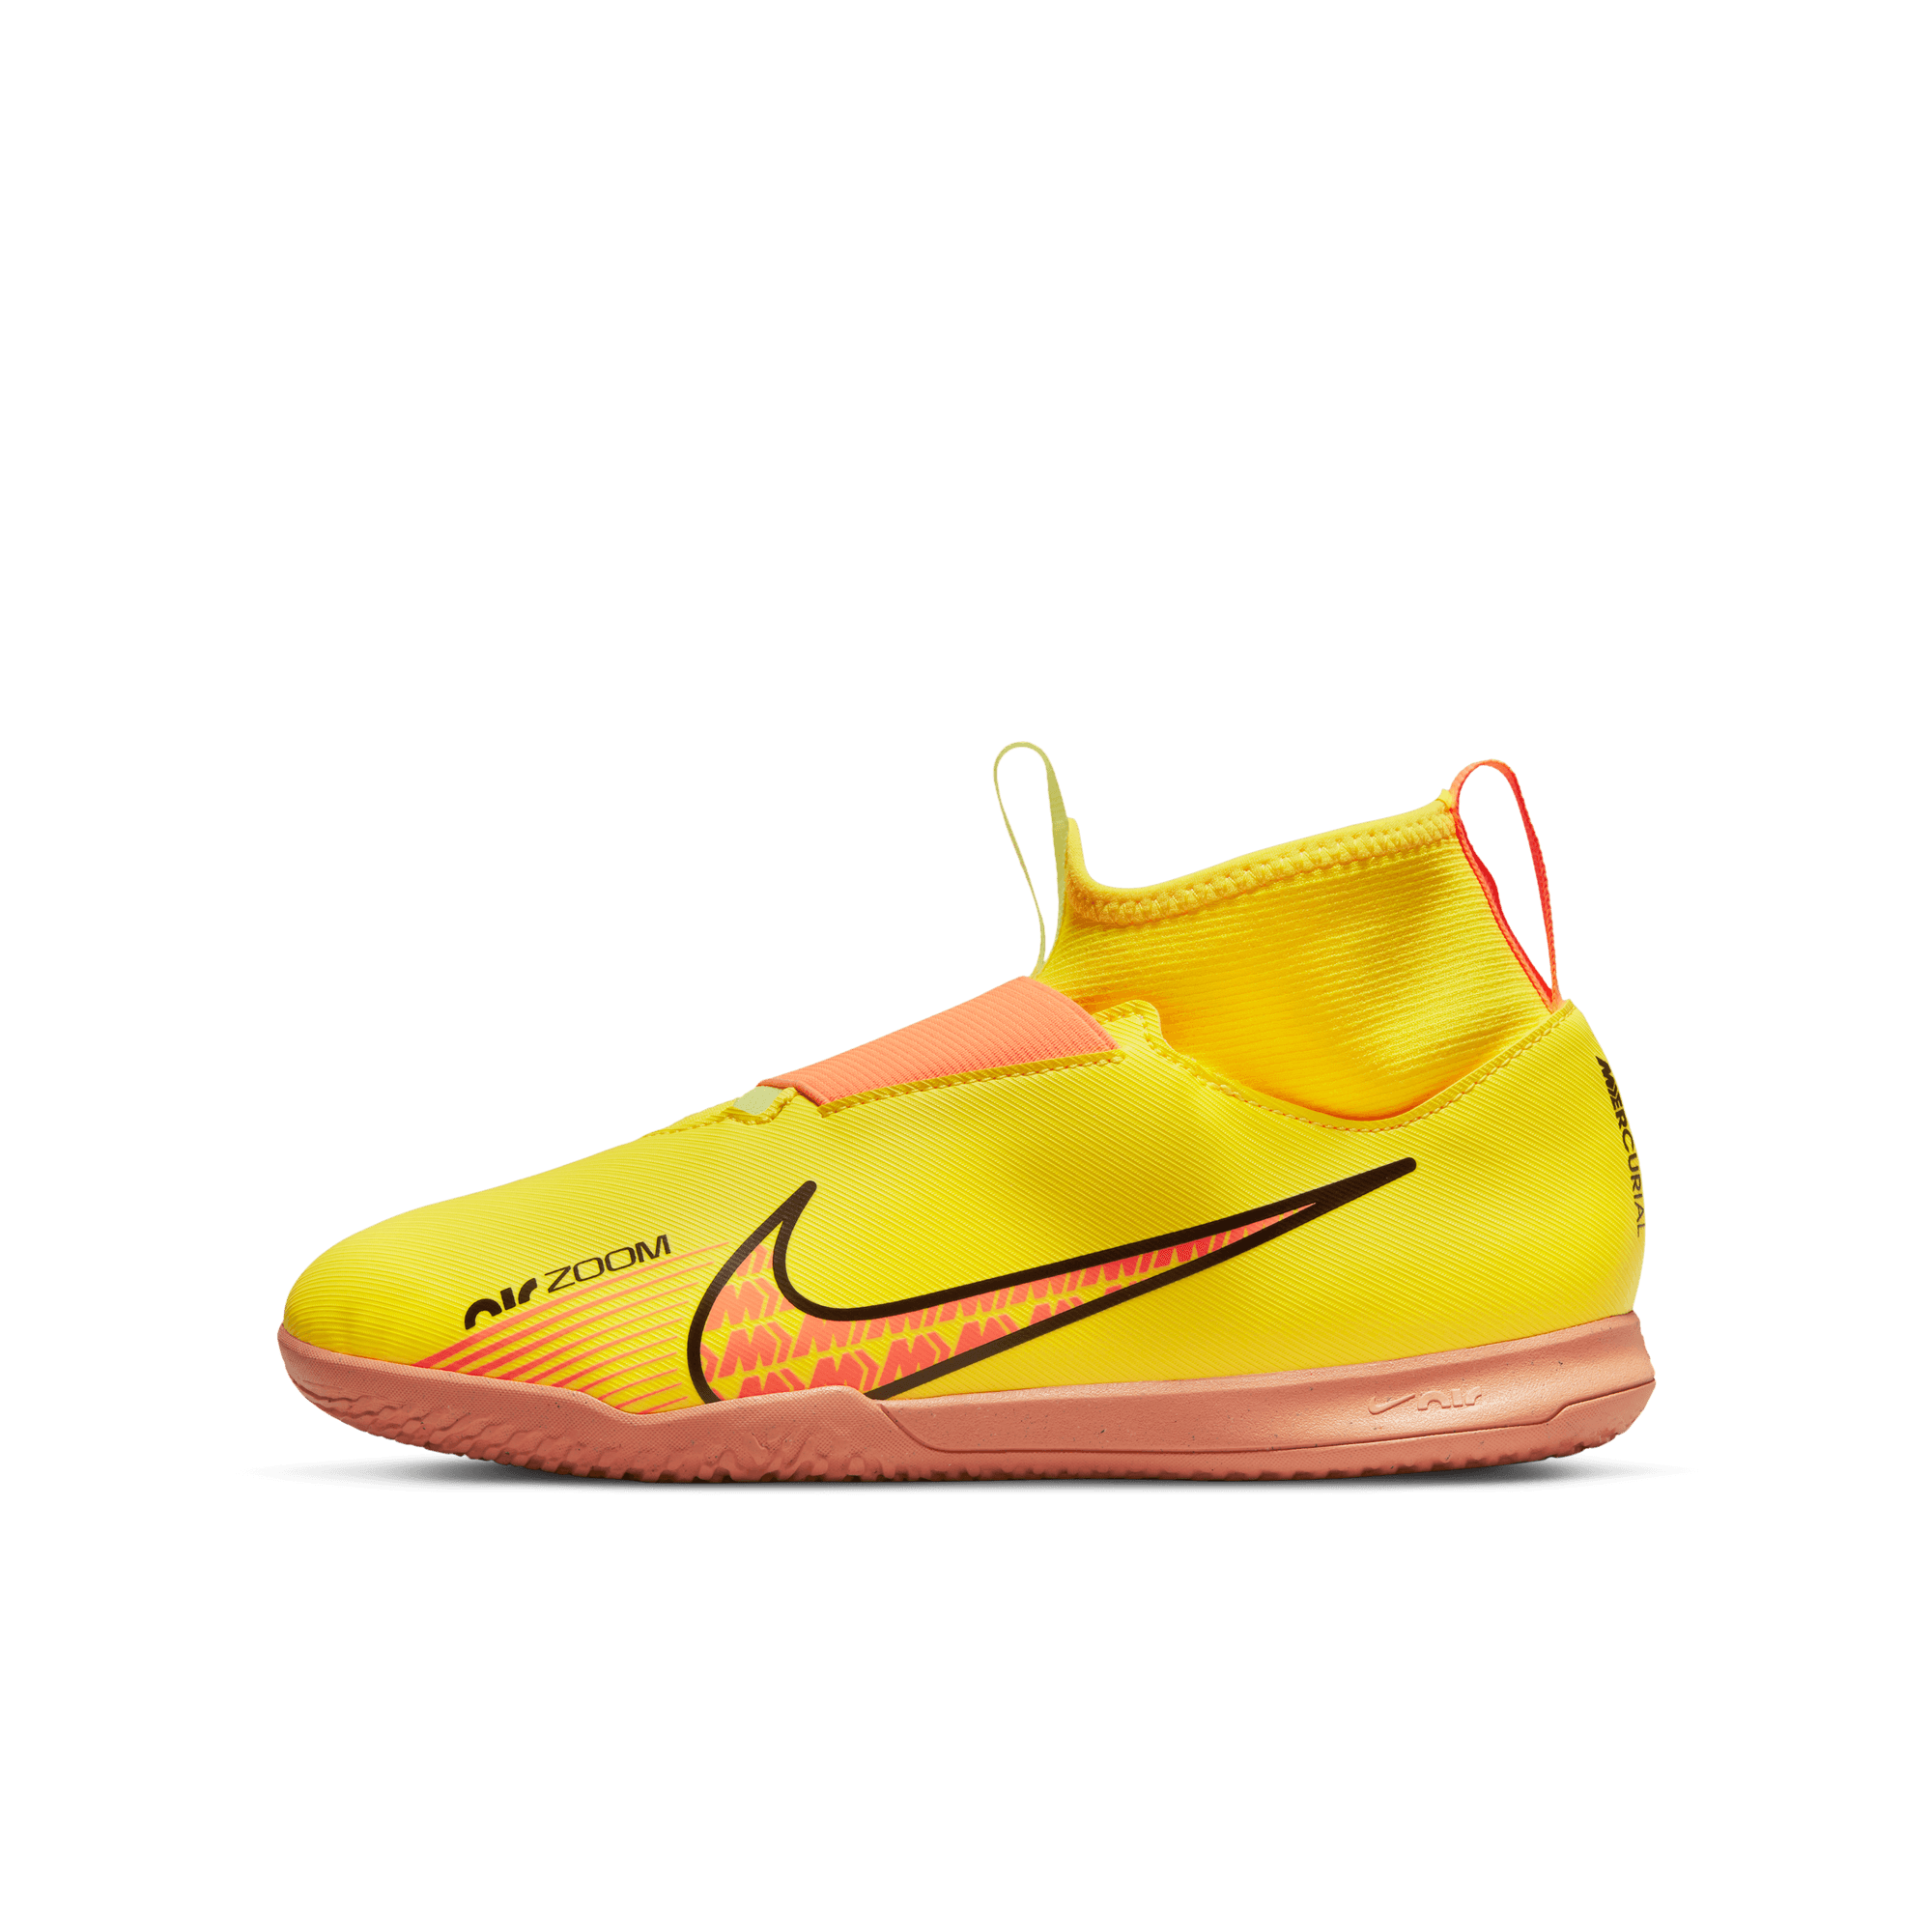 Nike Zoom Superfly Academy Indoor Soccer Shoes Yellow | medicproapp.com